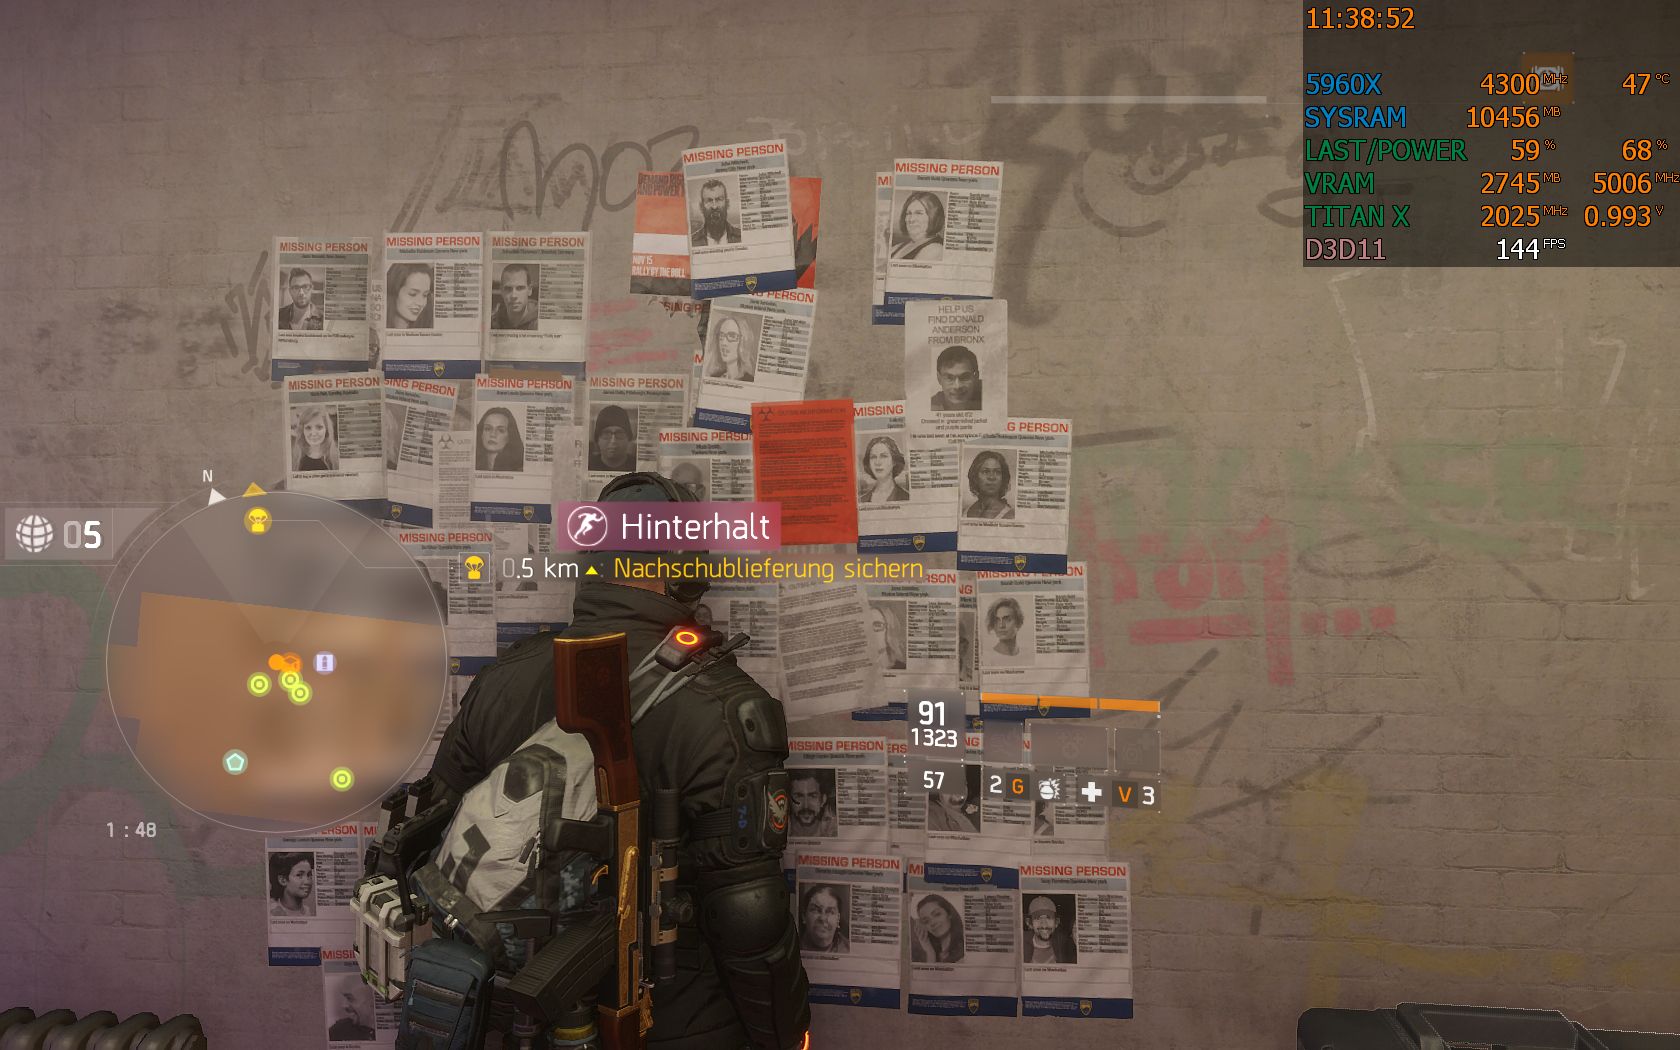 thedivision_2018_01_2mpsc7.jpg